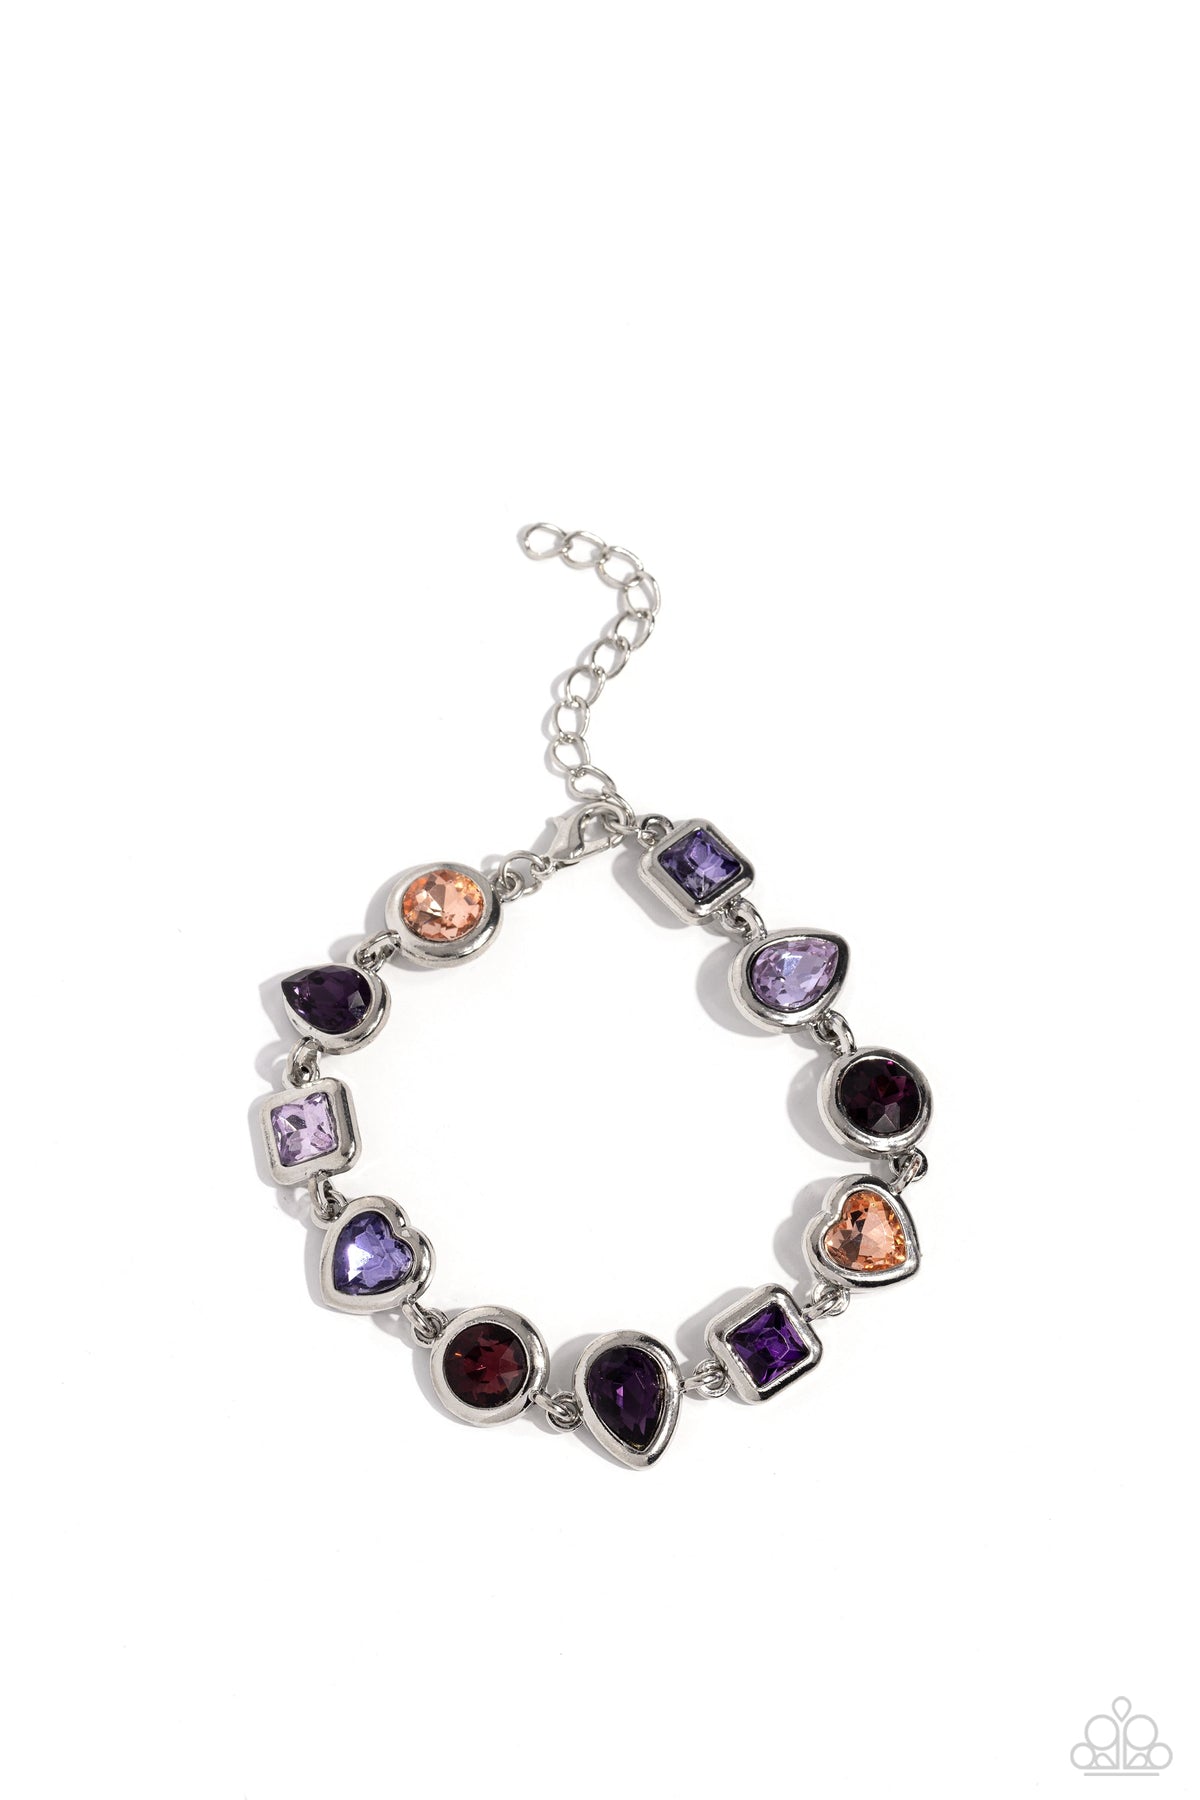 Actively Abstract Purple Rhinestone Bracelet - Paparazzi Accessories- lightbox - CarasShop.com - $5 Jewelry by Cara Jewels